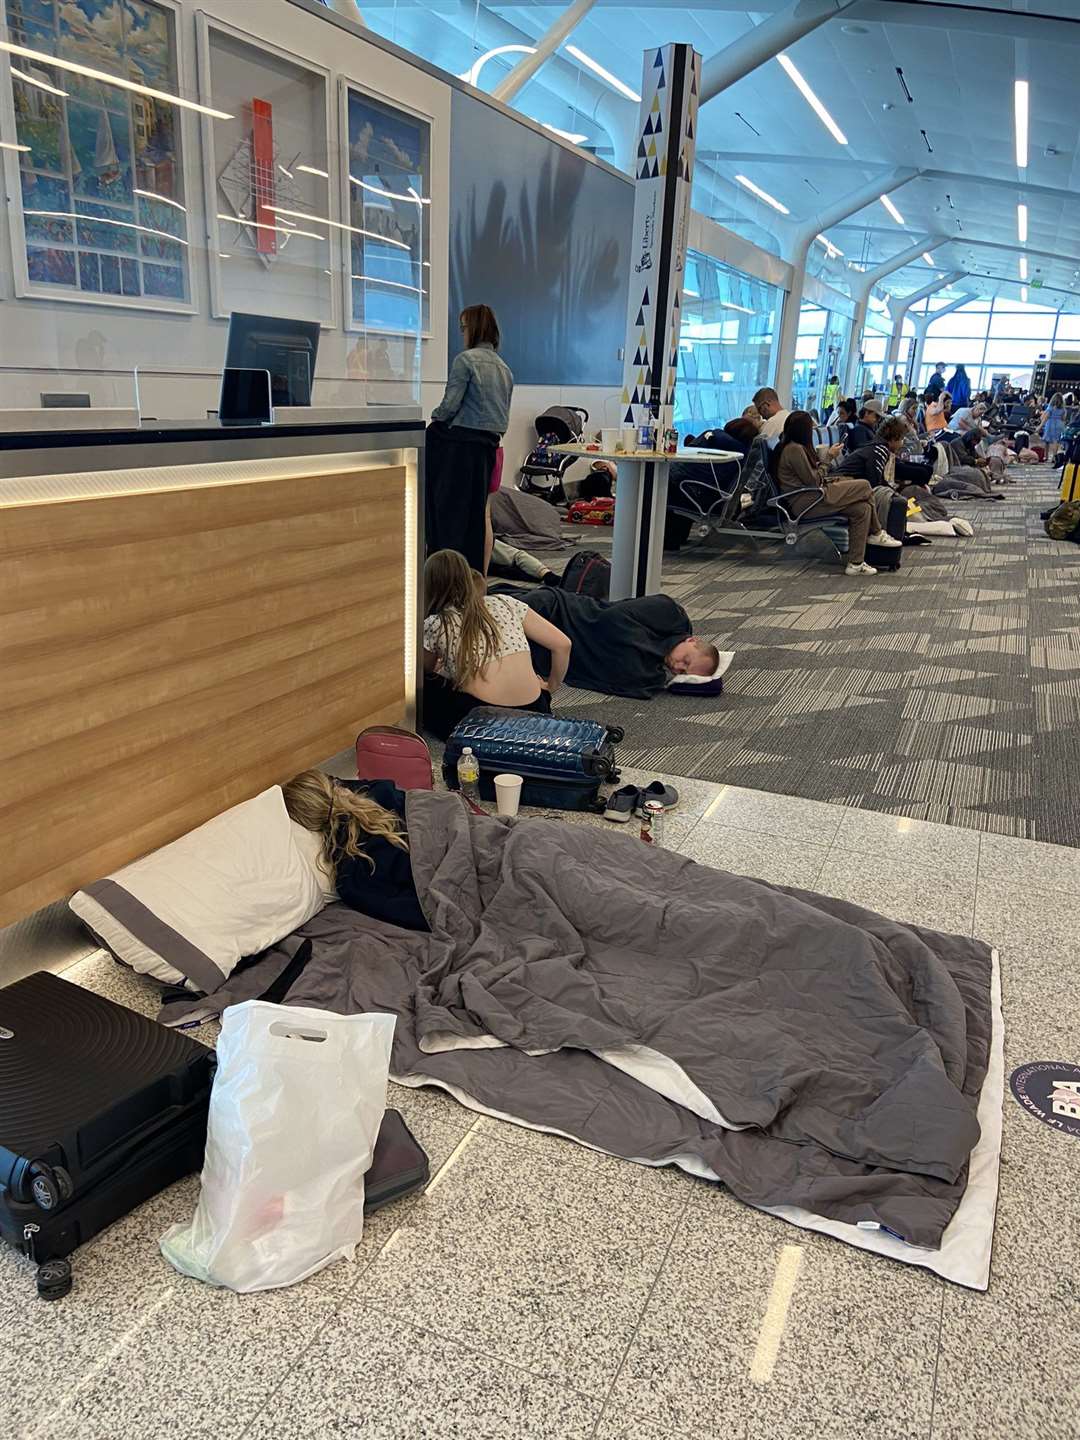 Like many others in the airport, the couple slept on the floor (Jonathan Lo/PA)